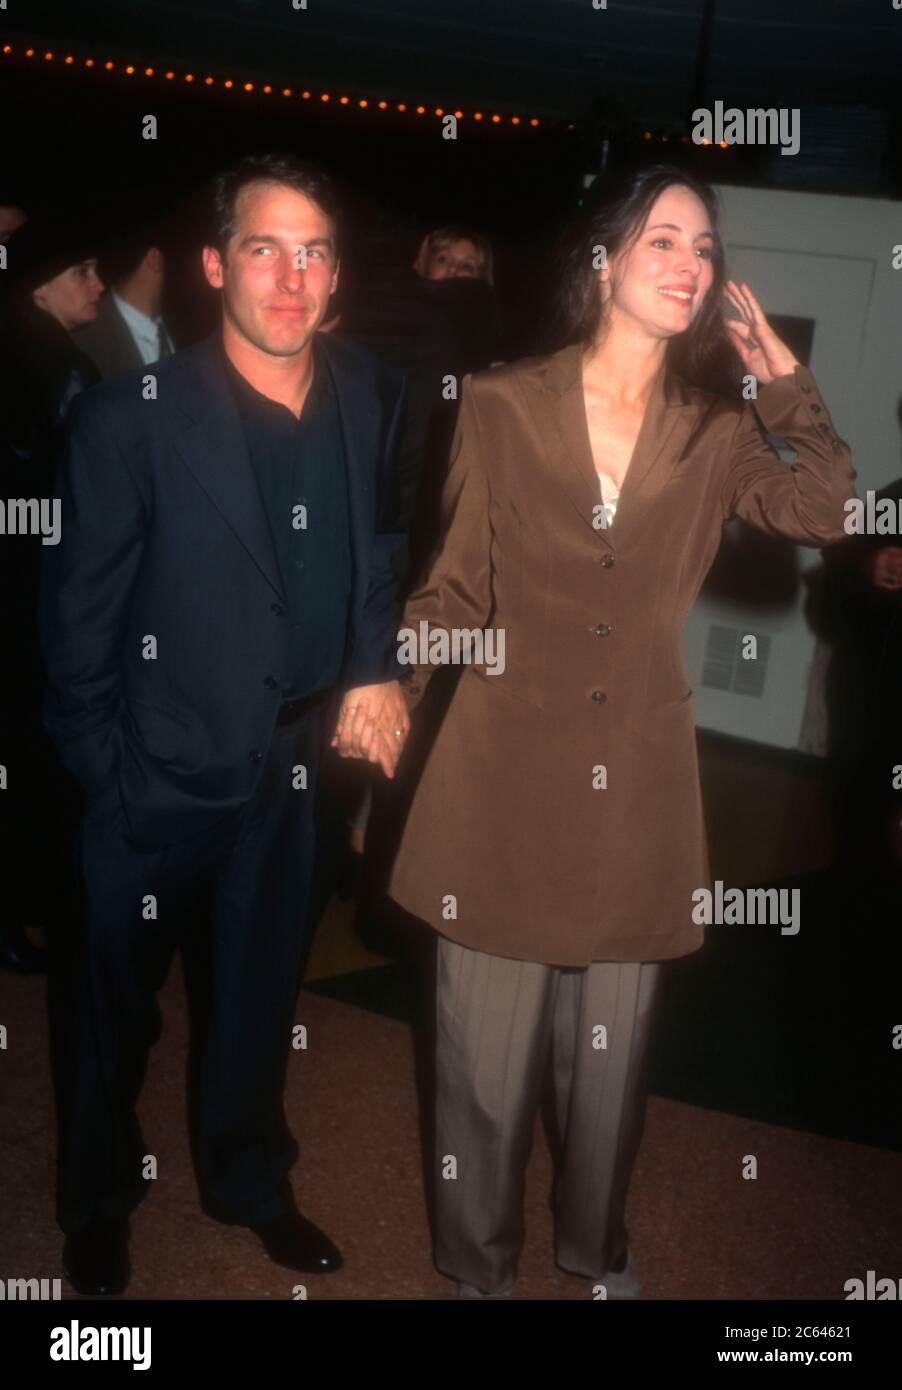 Westwood, California, USA 13th December 1995 Actor Brian Benben and actress Madeleine Stowe attend Universal Pictures' '12 Monkeys' Premiere on December 13, 1995 at Mann Bruin Theatre in Westwood, California, USA. Photo by Barry King/Alamy Stock Photo Stock Photo